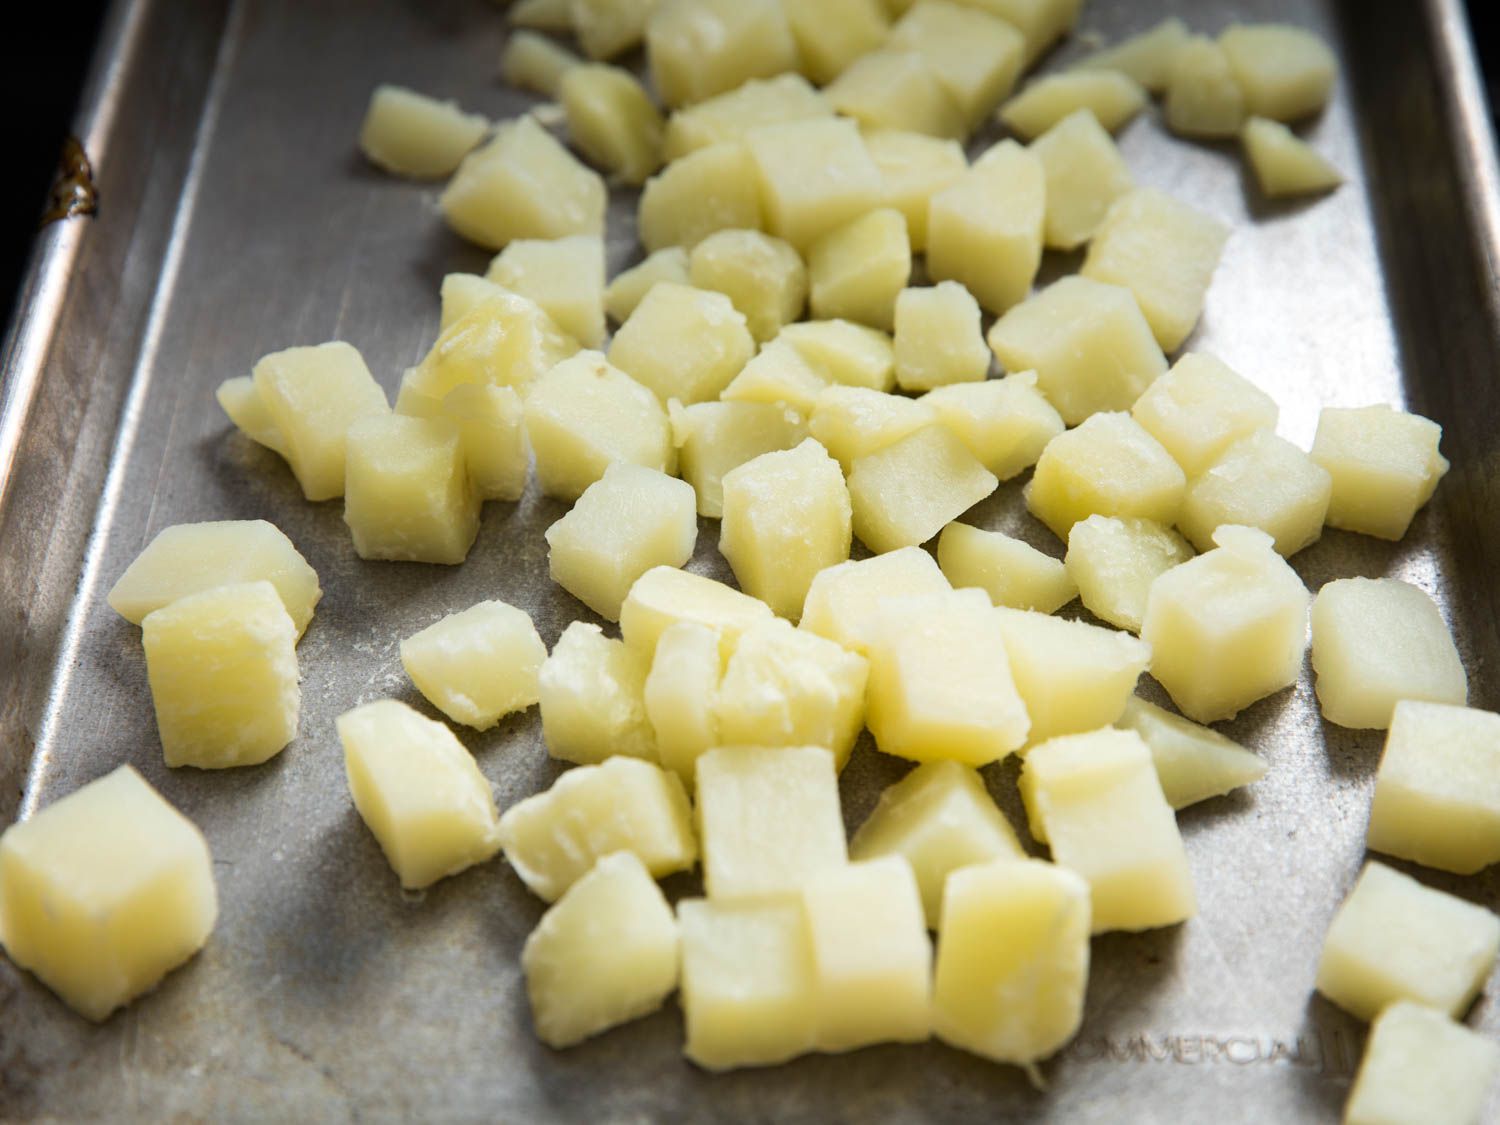 Cubes of boiled potatoes spread out on baking sheet